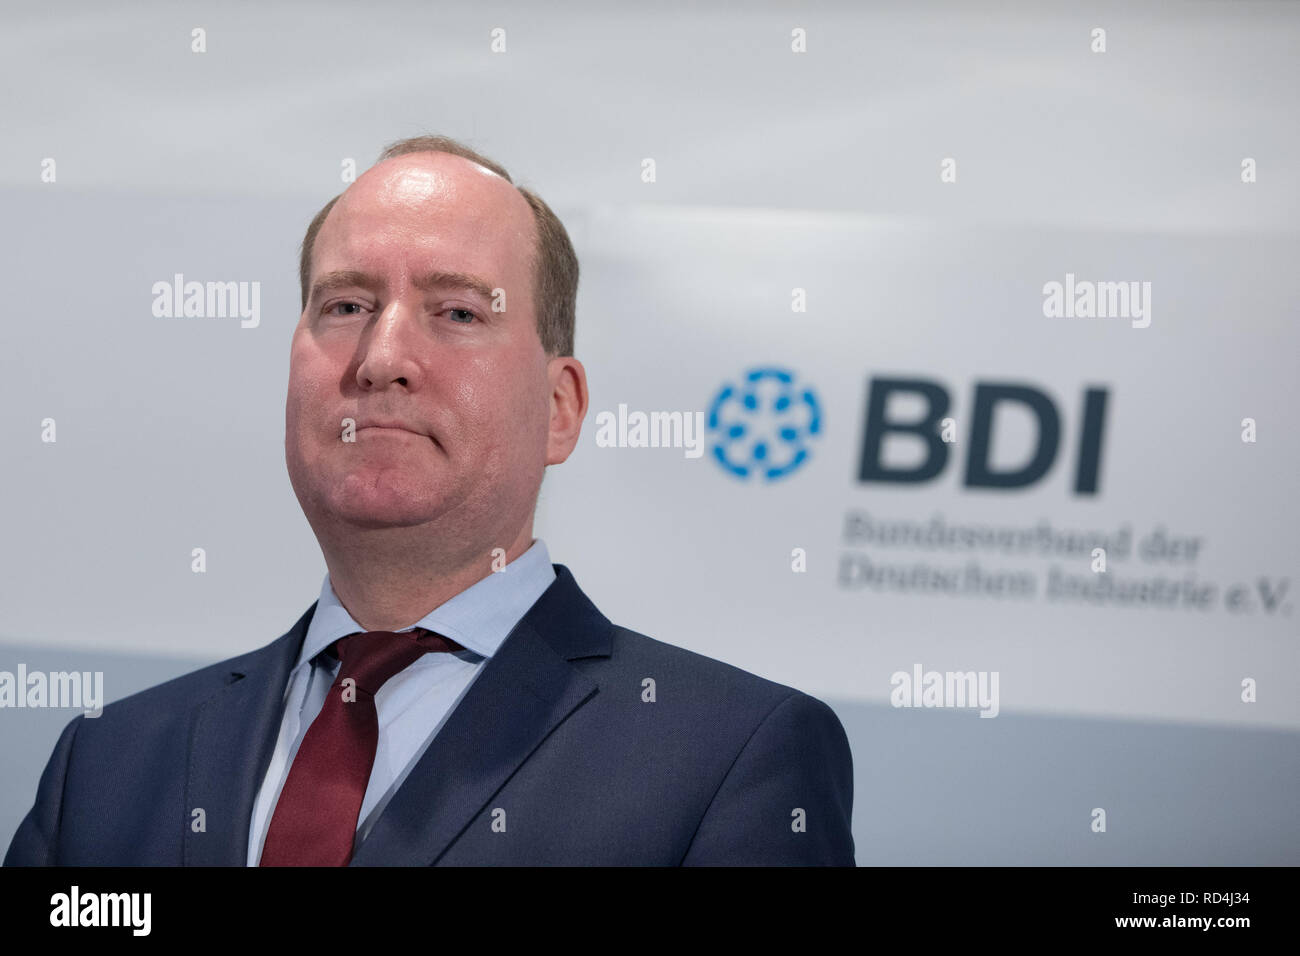 Berlin, Germany. 17th Jan, 2019. Joachim Lang, BDI Managing Director,  speaks at the annual kick-off pk of the Federation of German Industries  (BDI). It comments on current economic policy developments and on